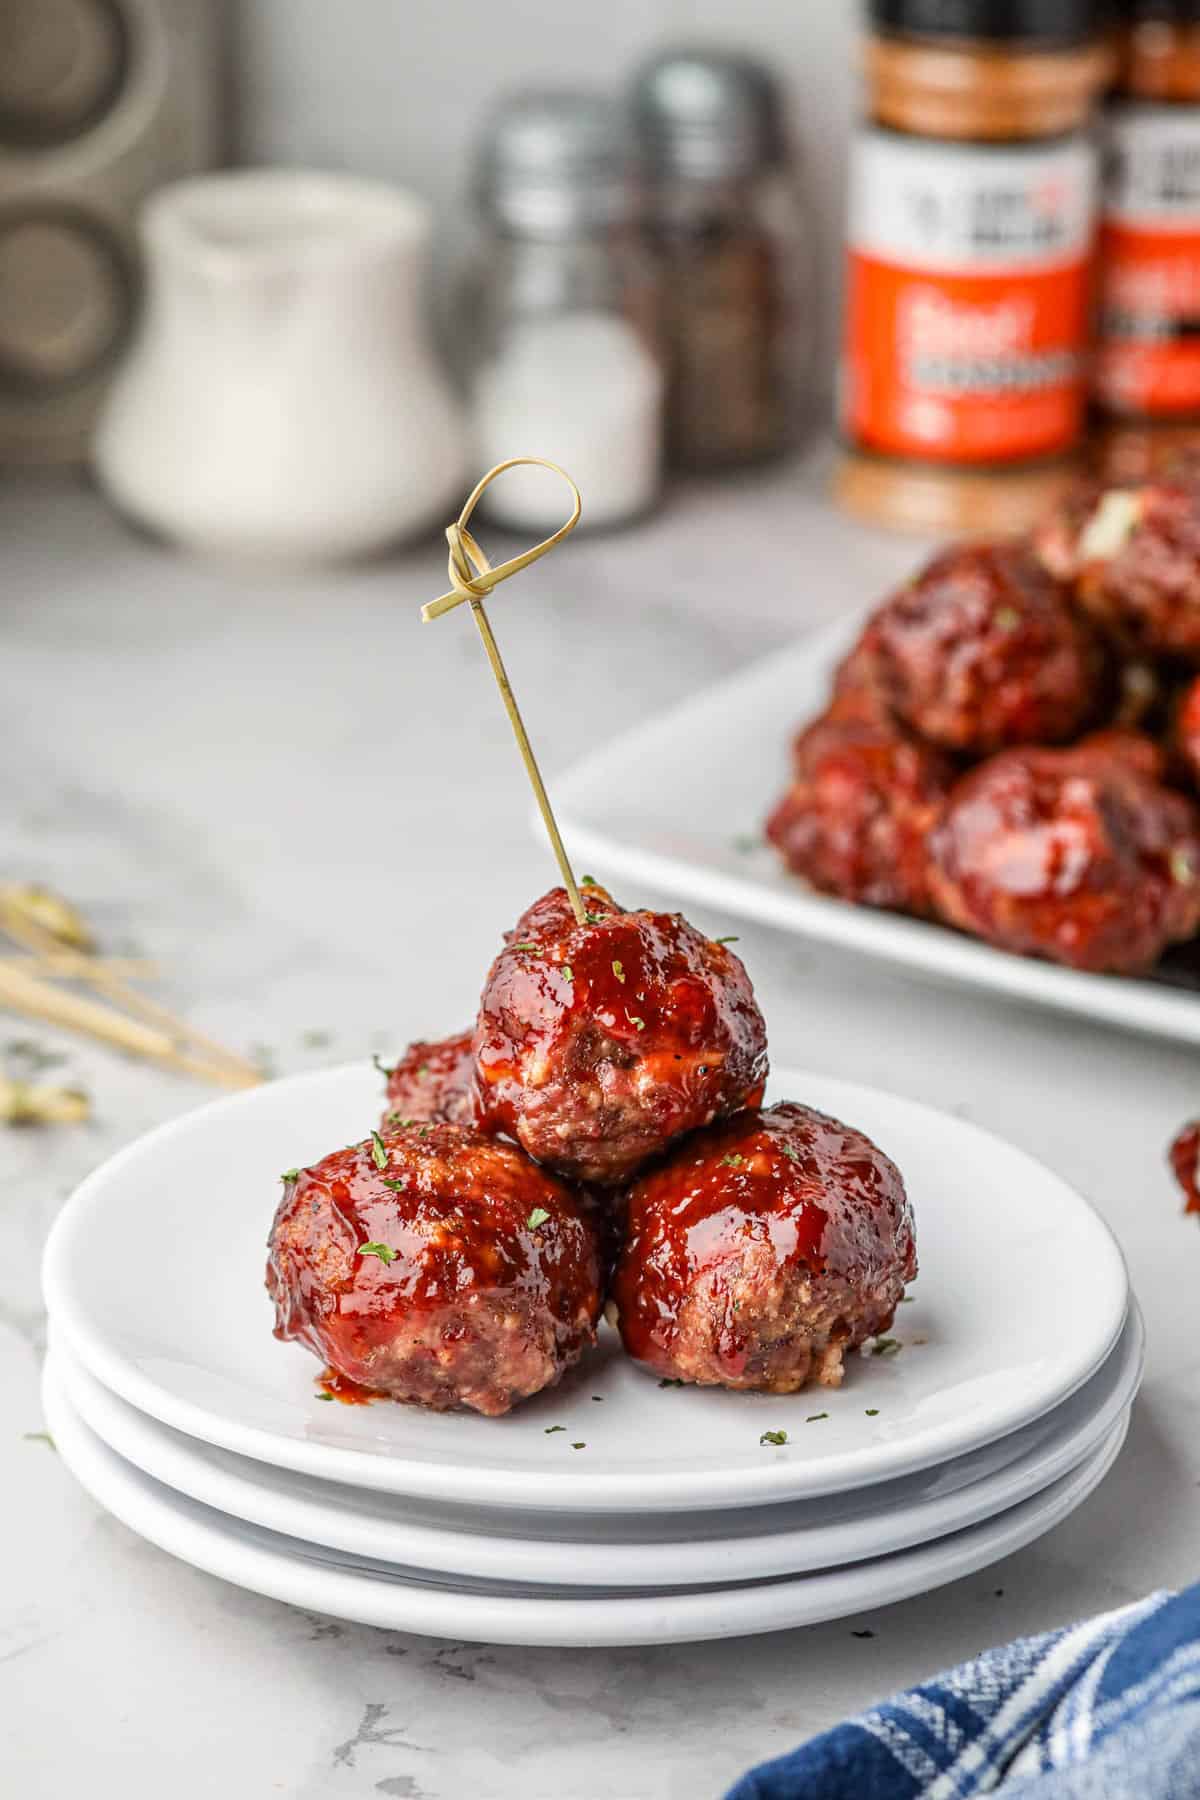 Smoked Stuffed Meatballs stacked on plate with food pick